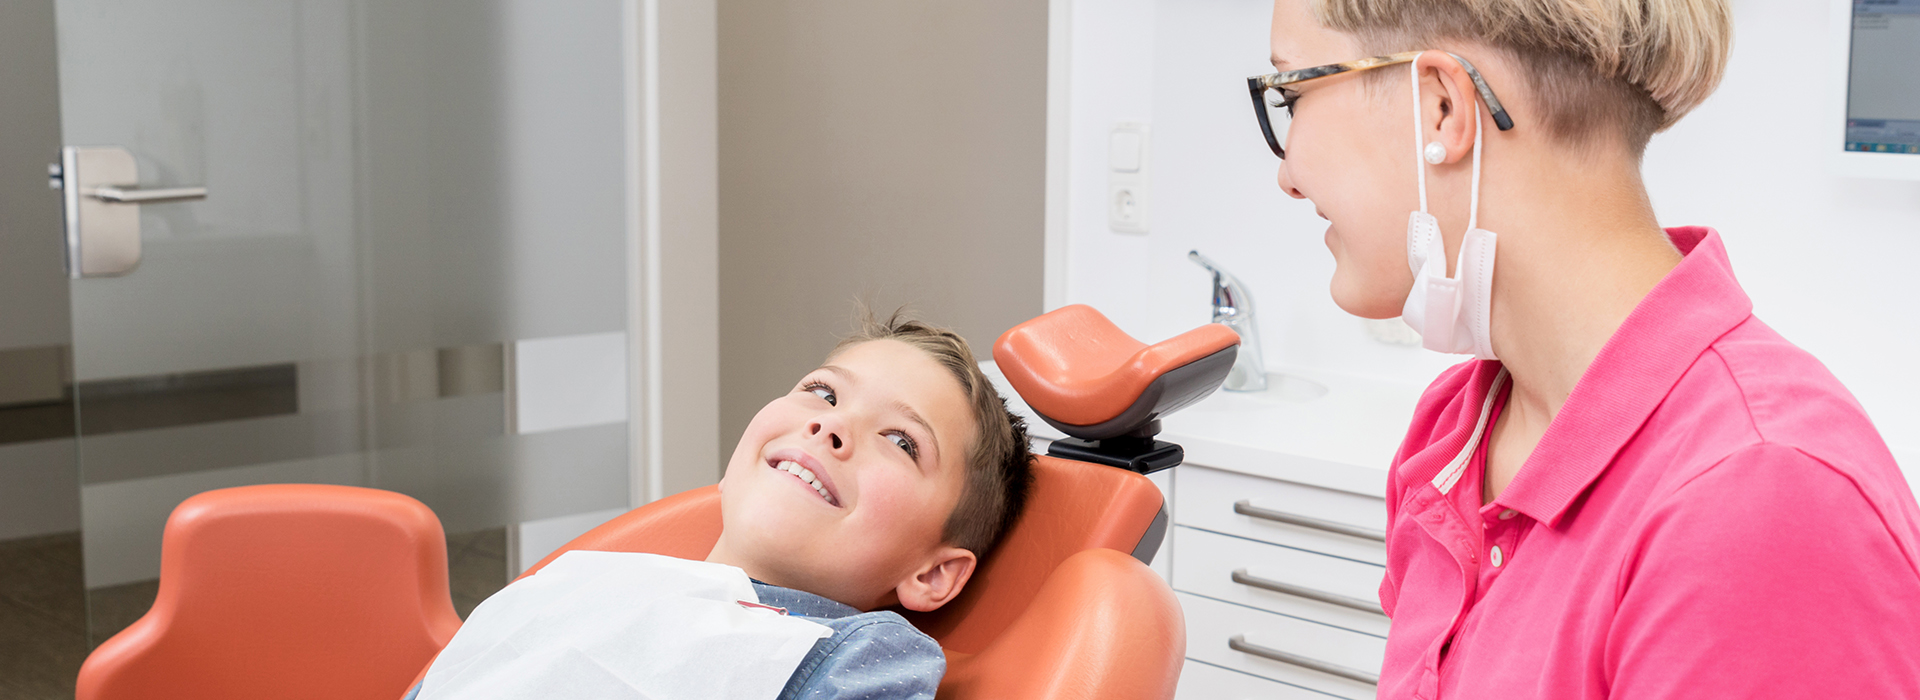 Cameron Park Dental Care | Root Canals, Emergency Treatment and Fluoride Treatment